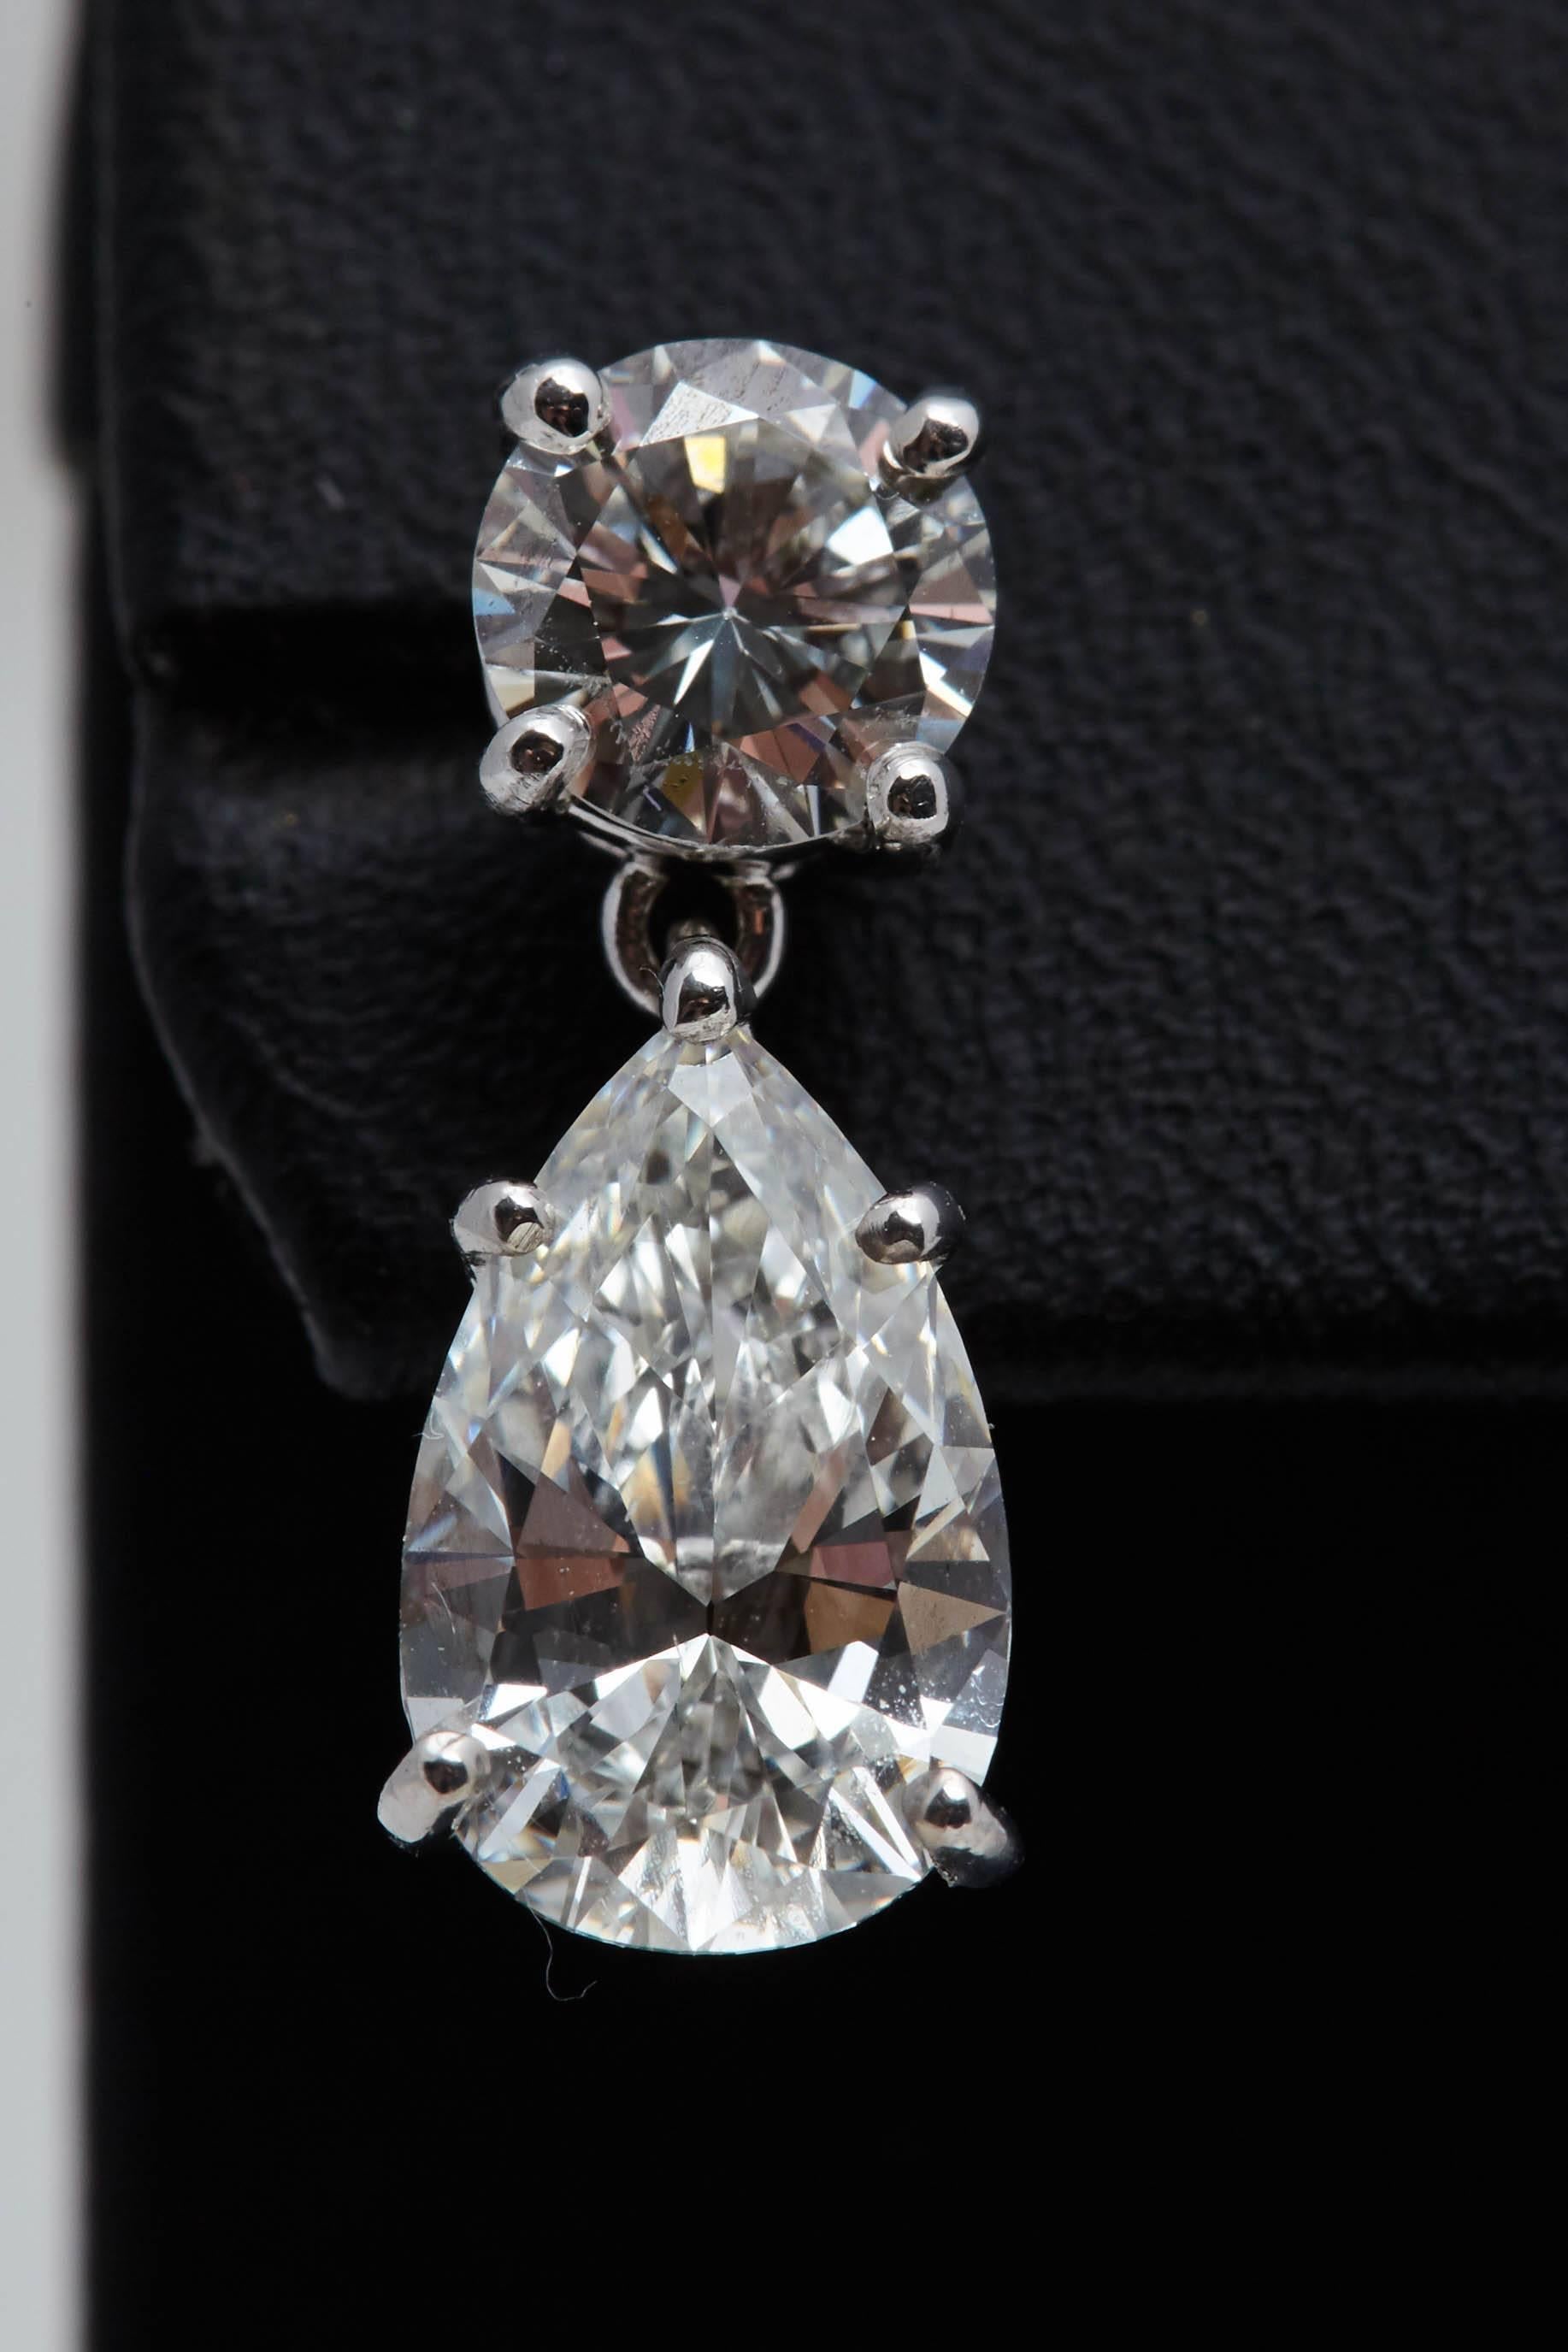 Two pear shaped diamonds with a total weight of 3.08 carats. The pear shaped diamonds are suspended from two round diamonds weighing approximately 1.20 carats. The pear shaped diamonds have certificates from the Gemological Institute of America